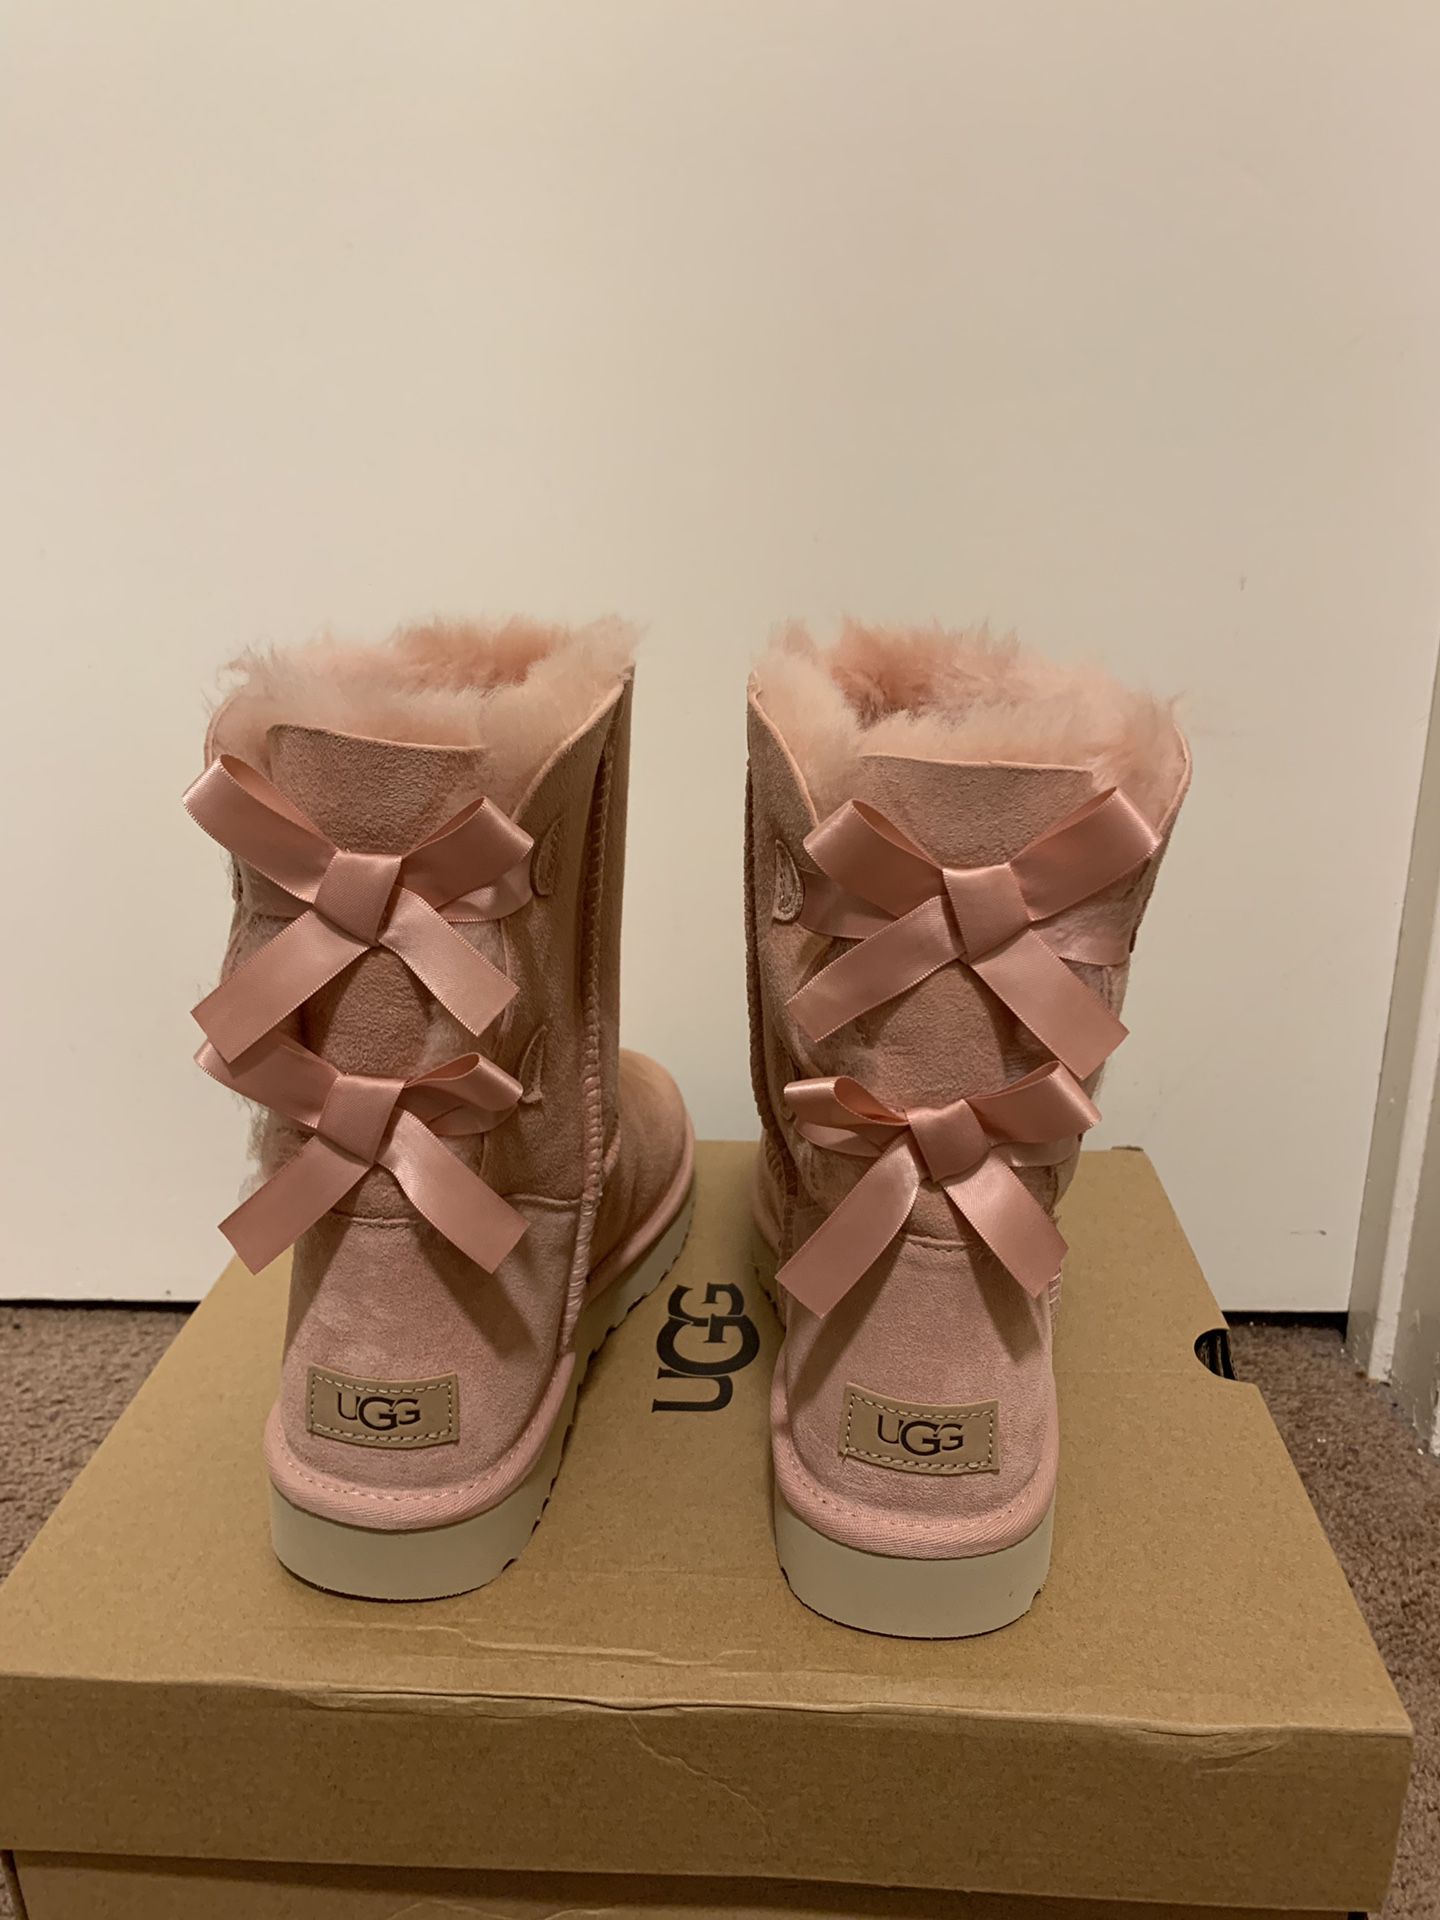 100% Authentic Brand New in Box UGG Bailey Bow Short Boots / Color: La Sunshine / Women size 5, 6, 7, 8, 11